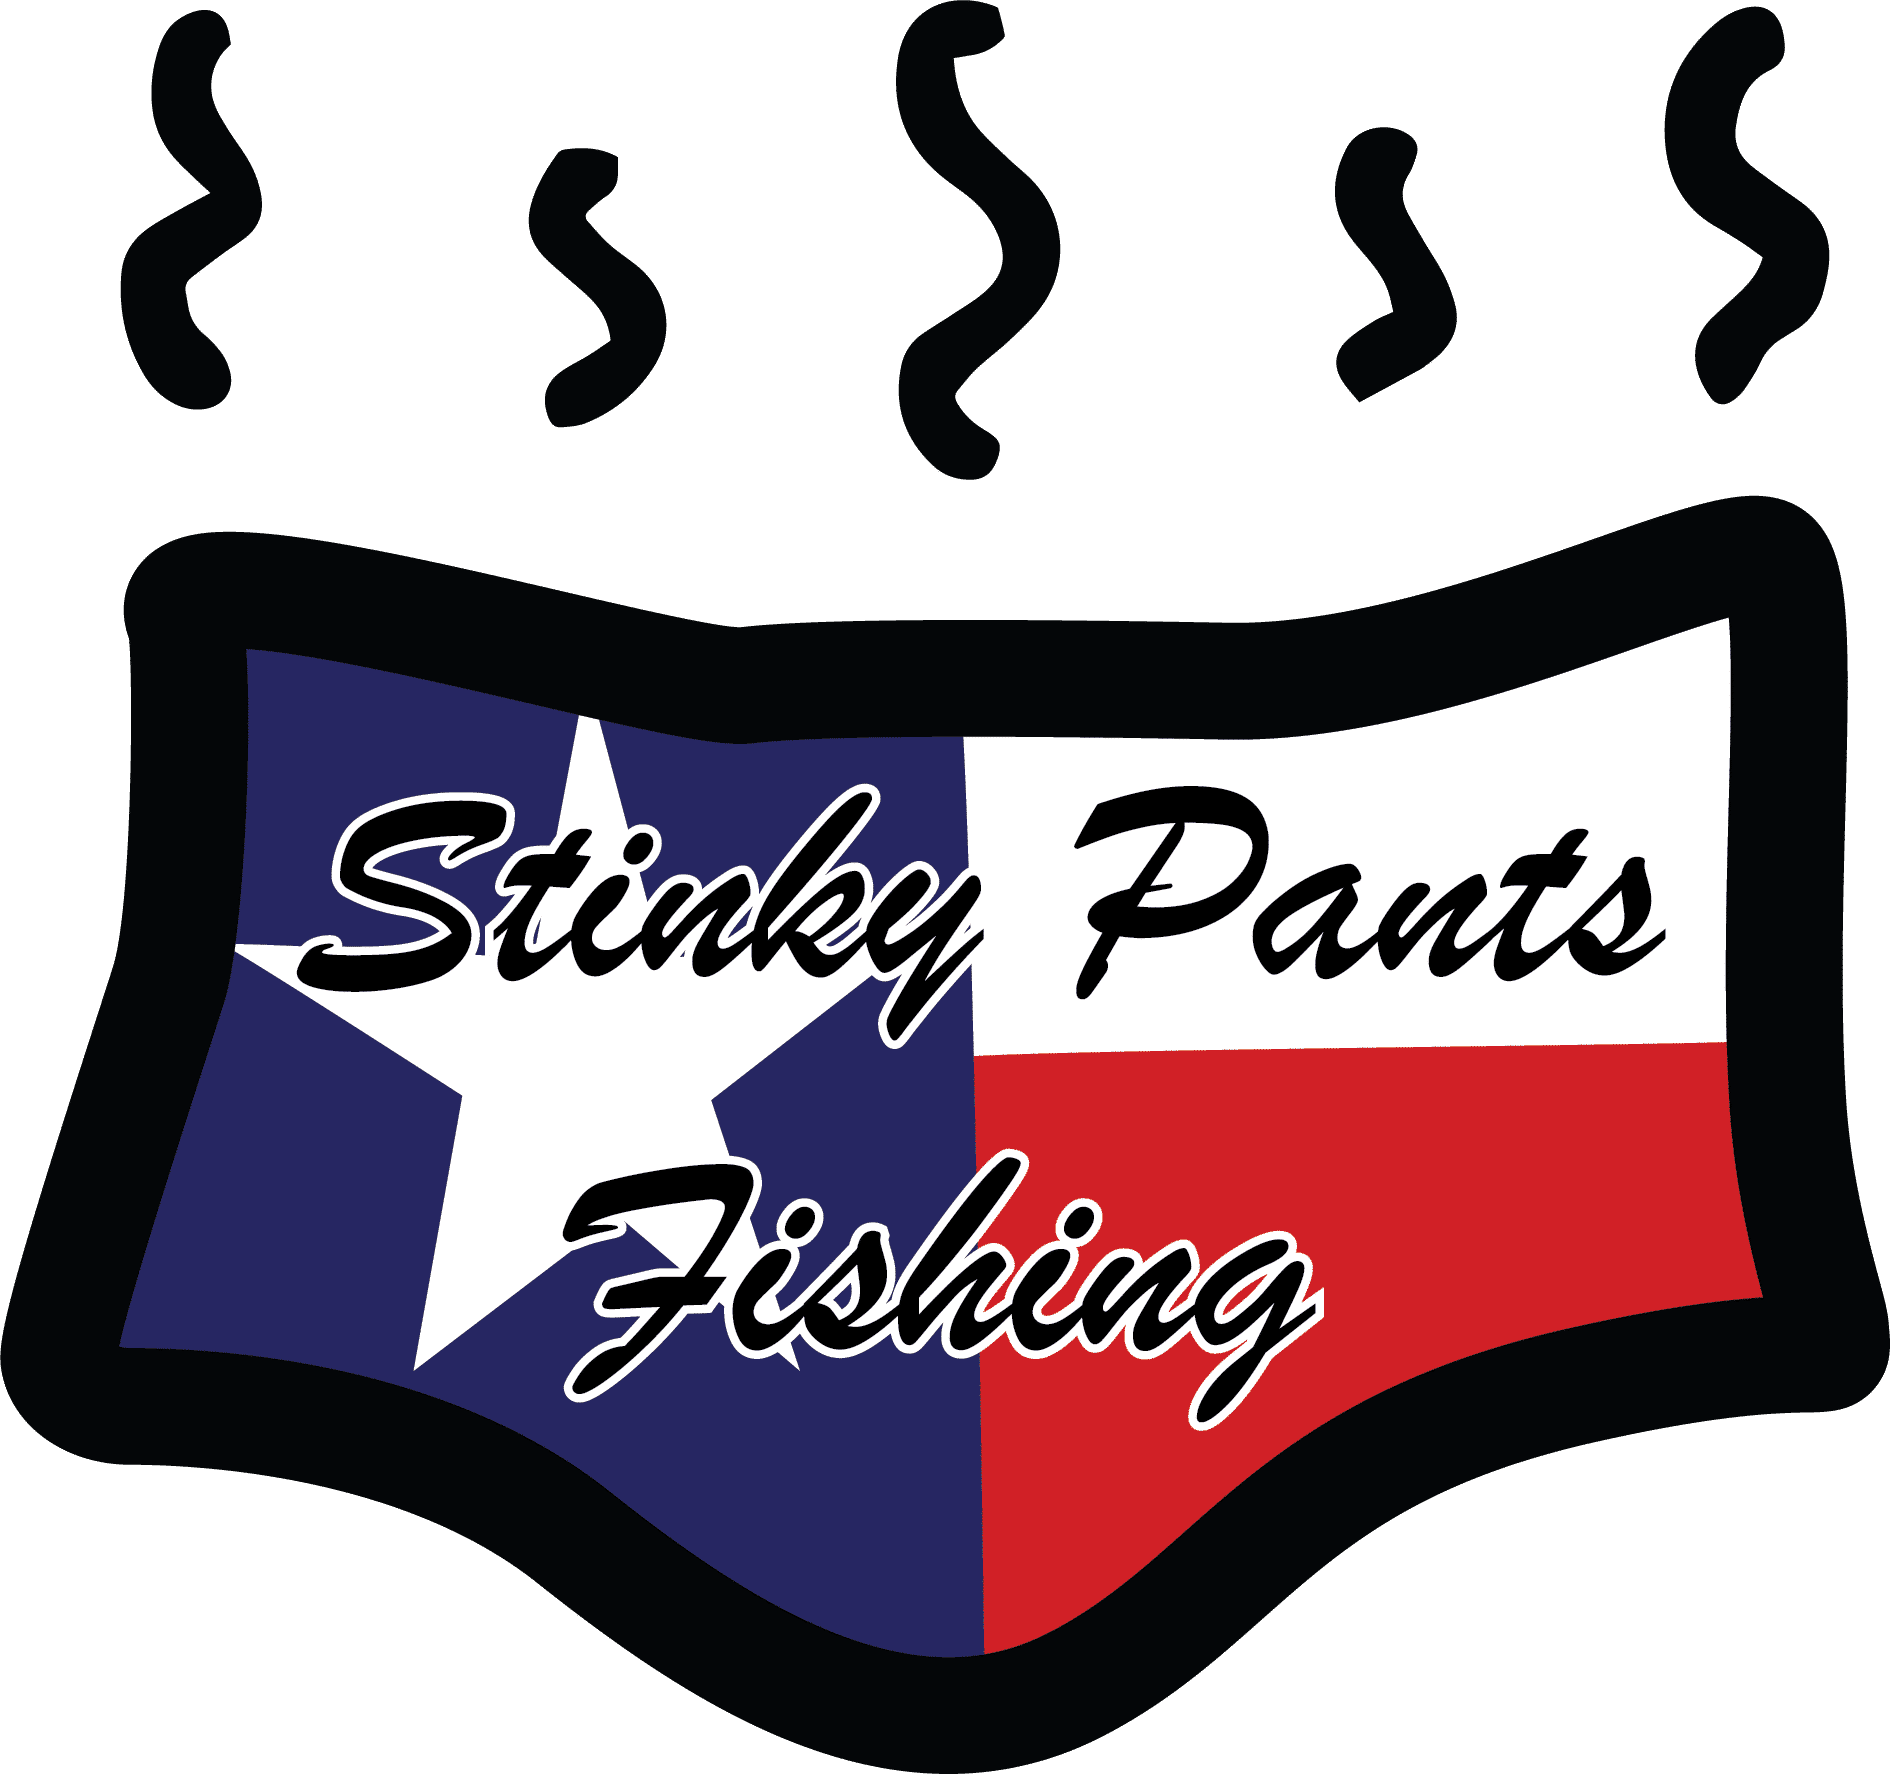 Clothes - Stinky Pants Fishing